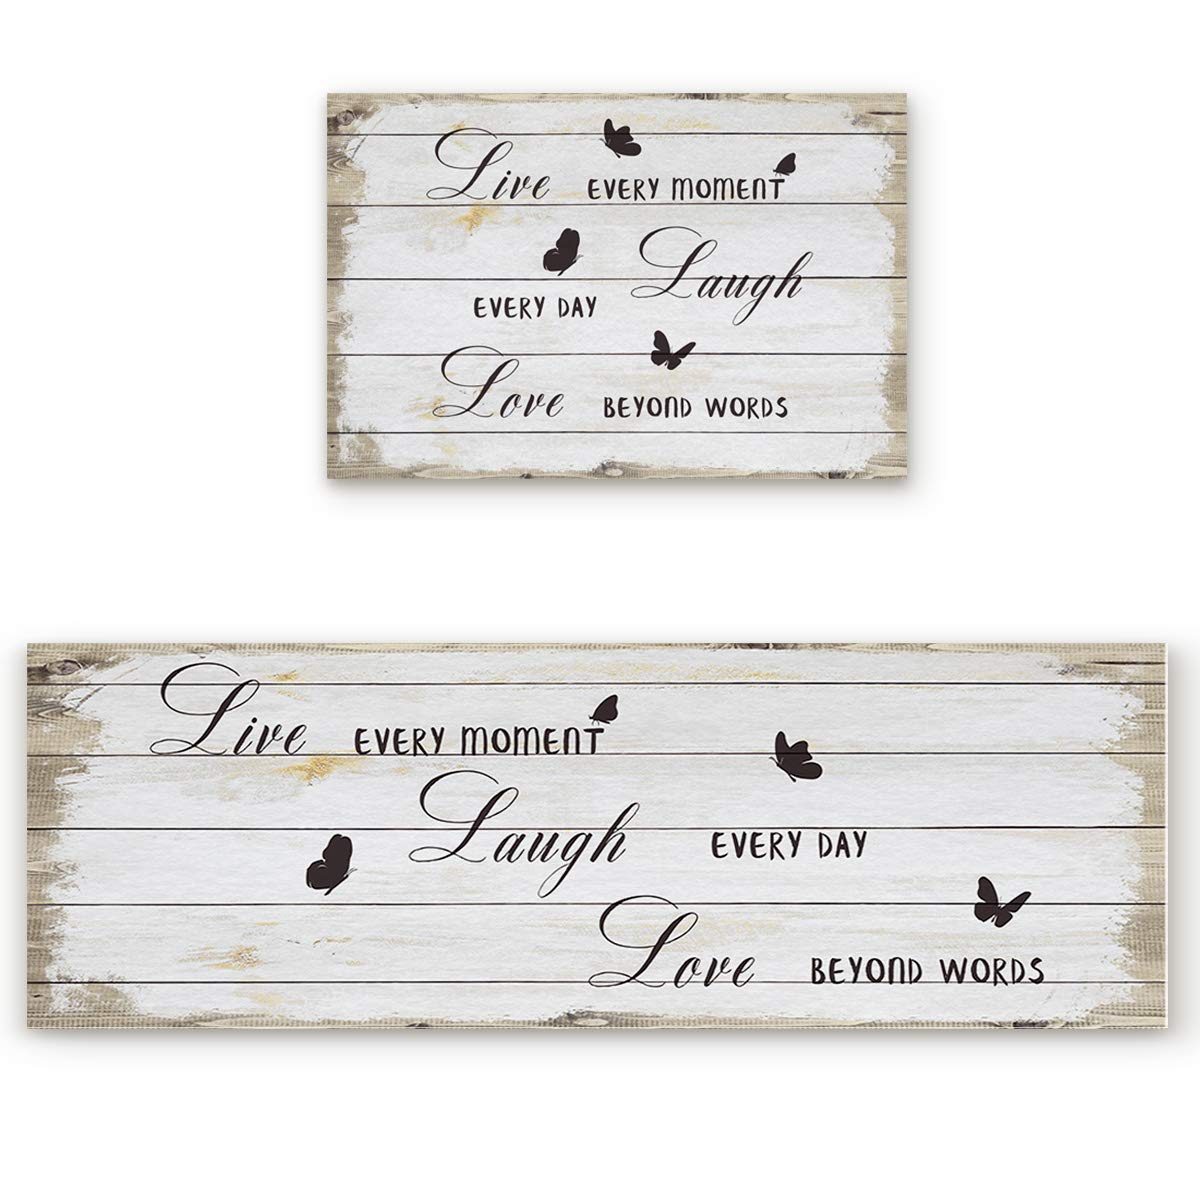 Kitchen Mat Set 2 Piece Kitchen Rugs, Black Positive Energy Live - Laugh - Love Butterflies Soft Rubber Backing Mats Bathroom Runner Area Rugs, 19.7x31.5in + 19.7x47.2in Vintage Wooden Stripes Grain